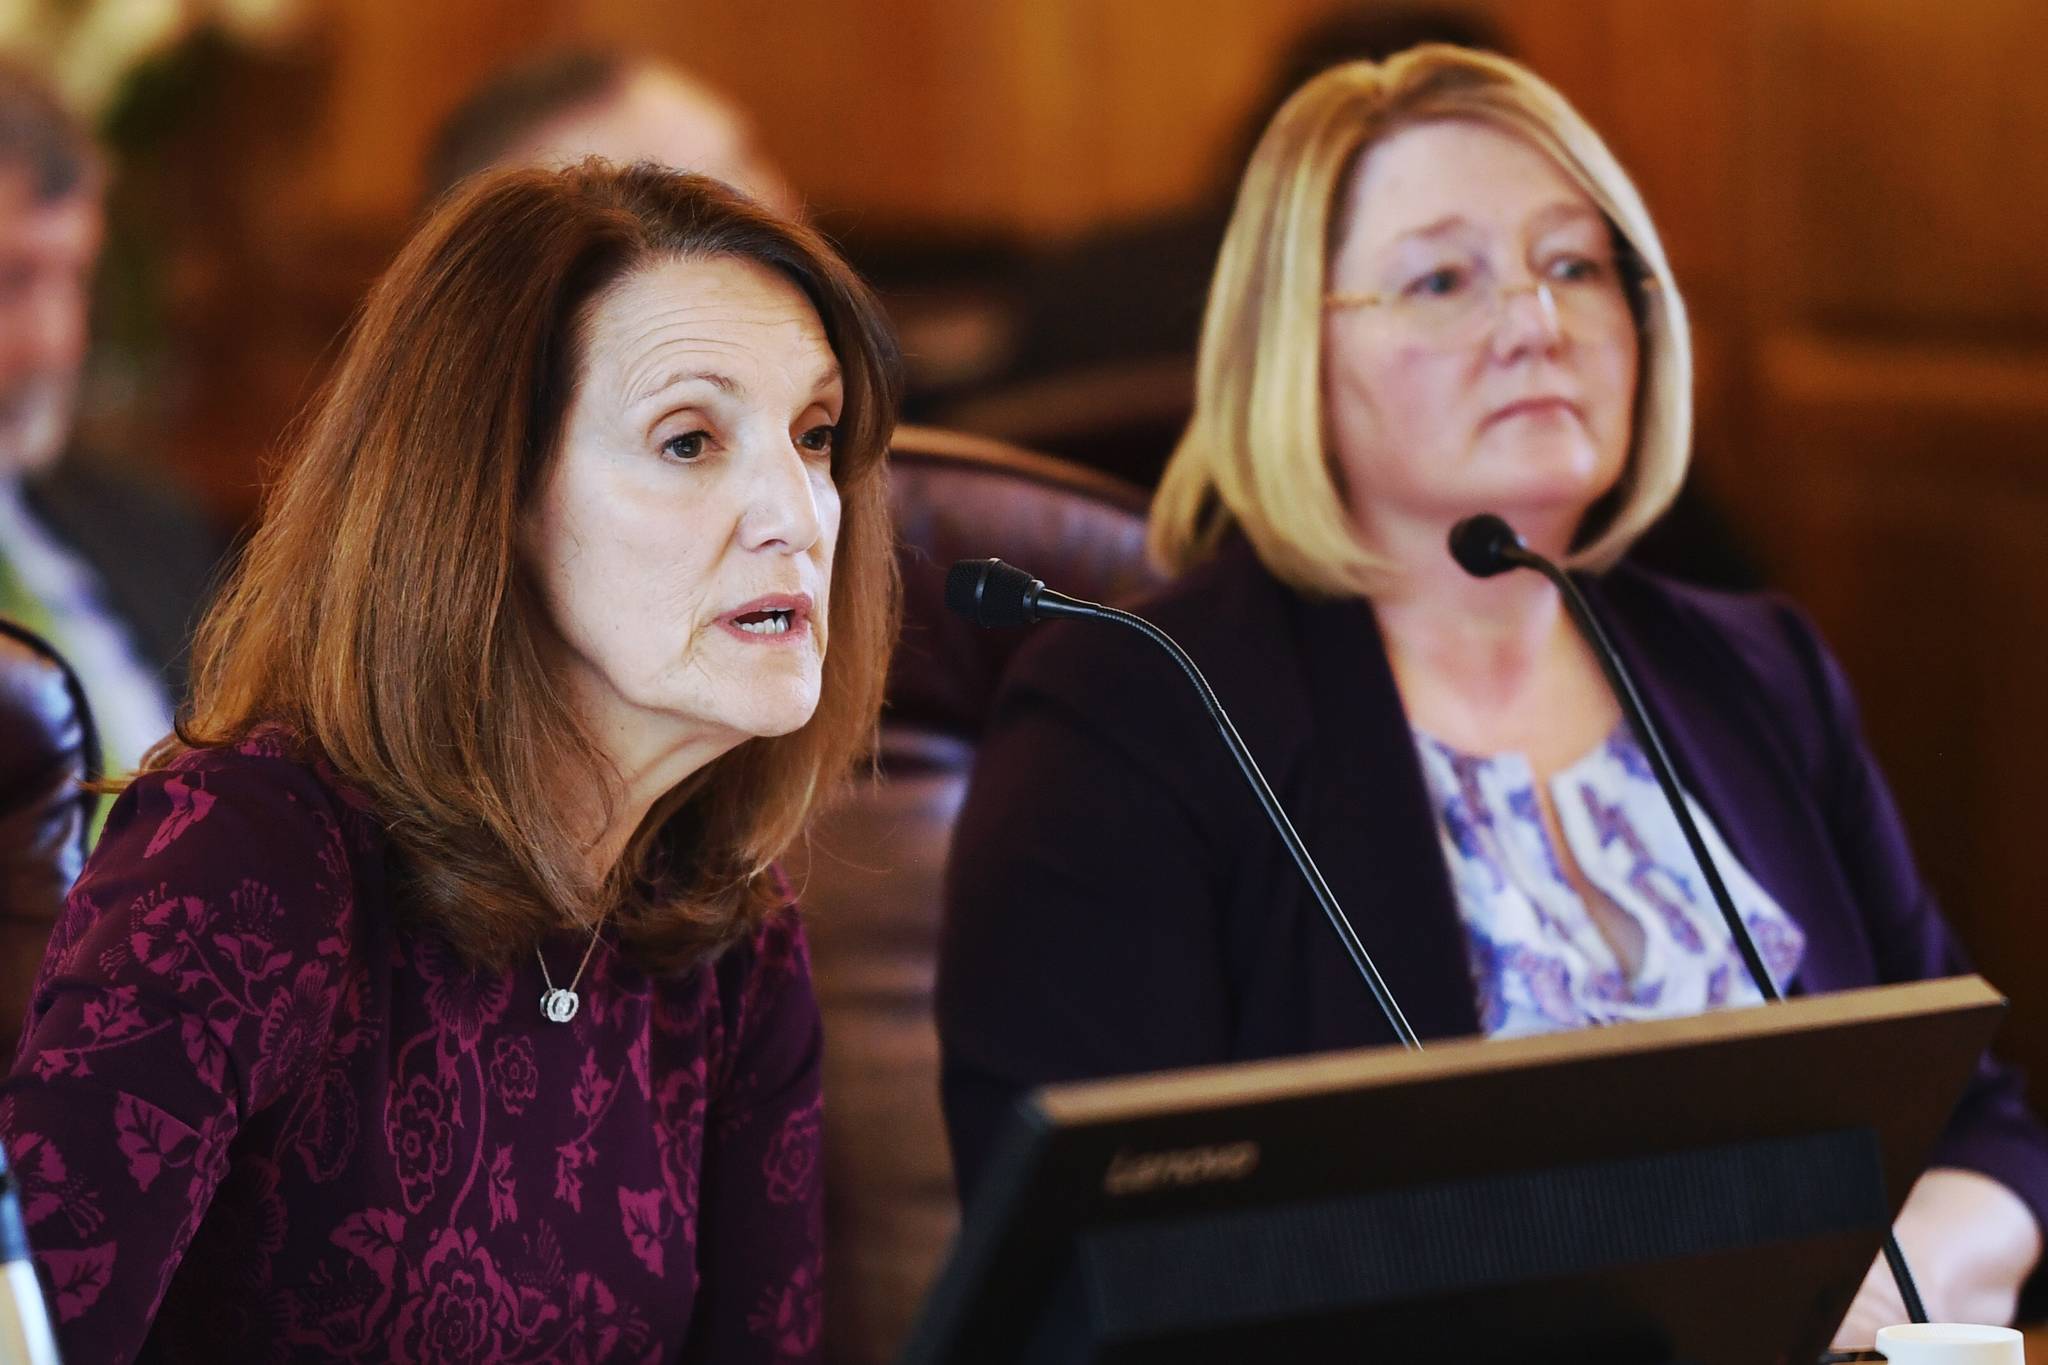 Dana Efird, Administrative Services Director for the Department of Health and Social Services, left, and Deputy Commissioner Donna Steward give an overview of the budget for Medicaid Services to the House Finance Committee on Wednesday, March 27, 2019. (Michael Penn | Juneau Empire)